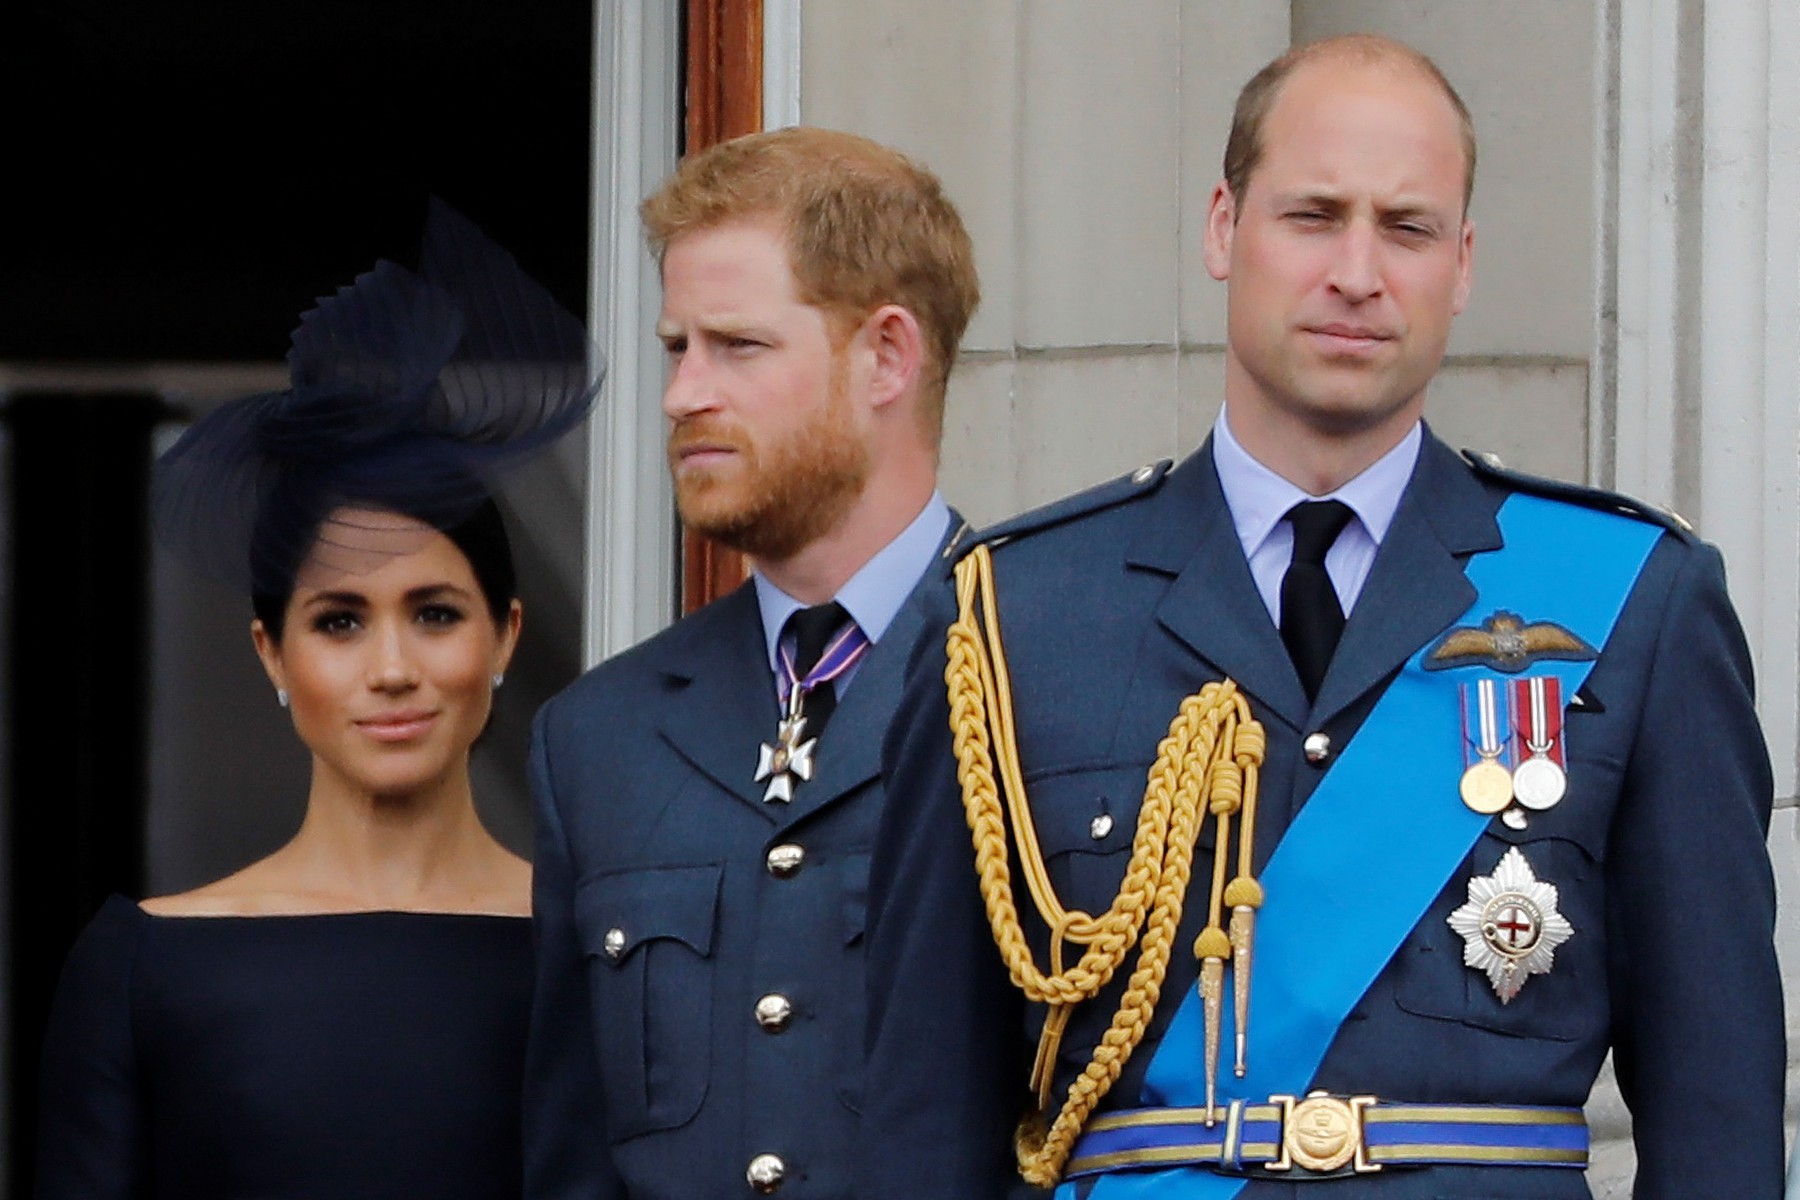 One source claimed the brothers had naturally readjusted since Prince Harry married Meghan Markle